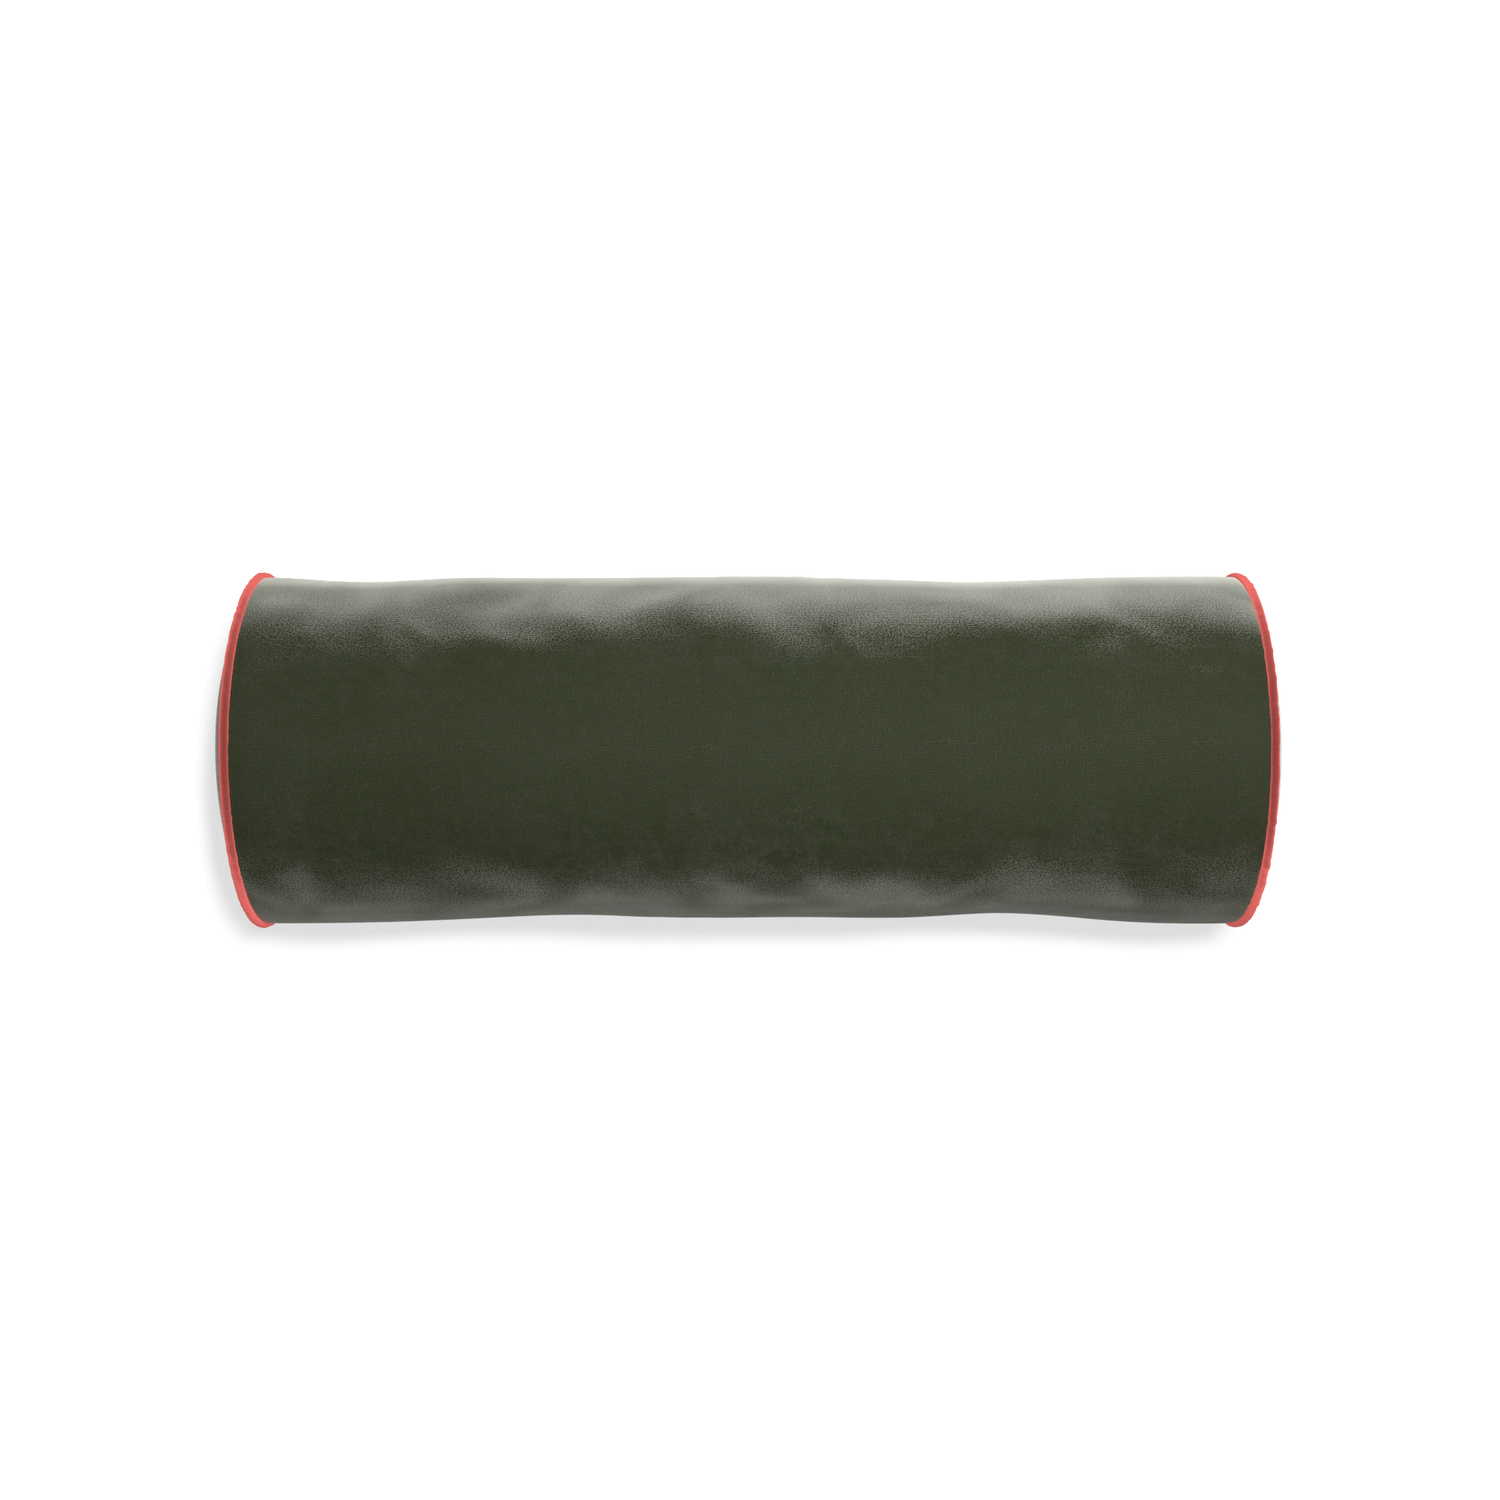 bolster fern green velvet pillow with coral piping